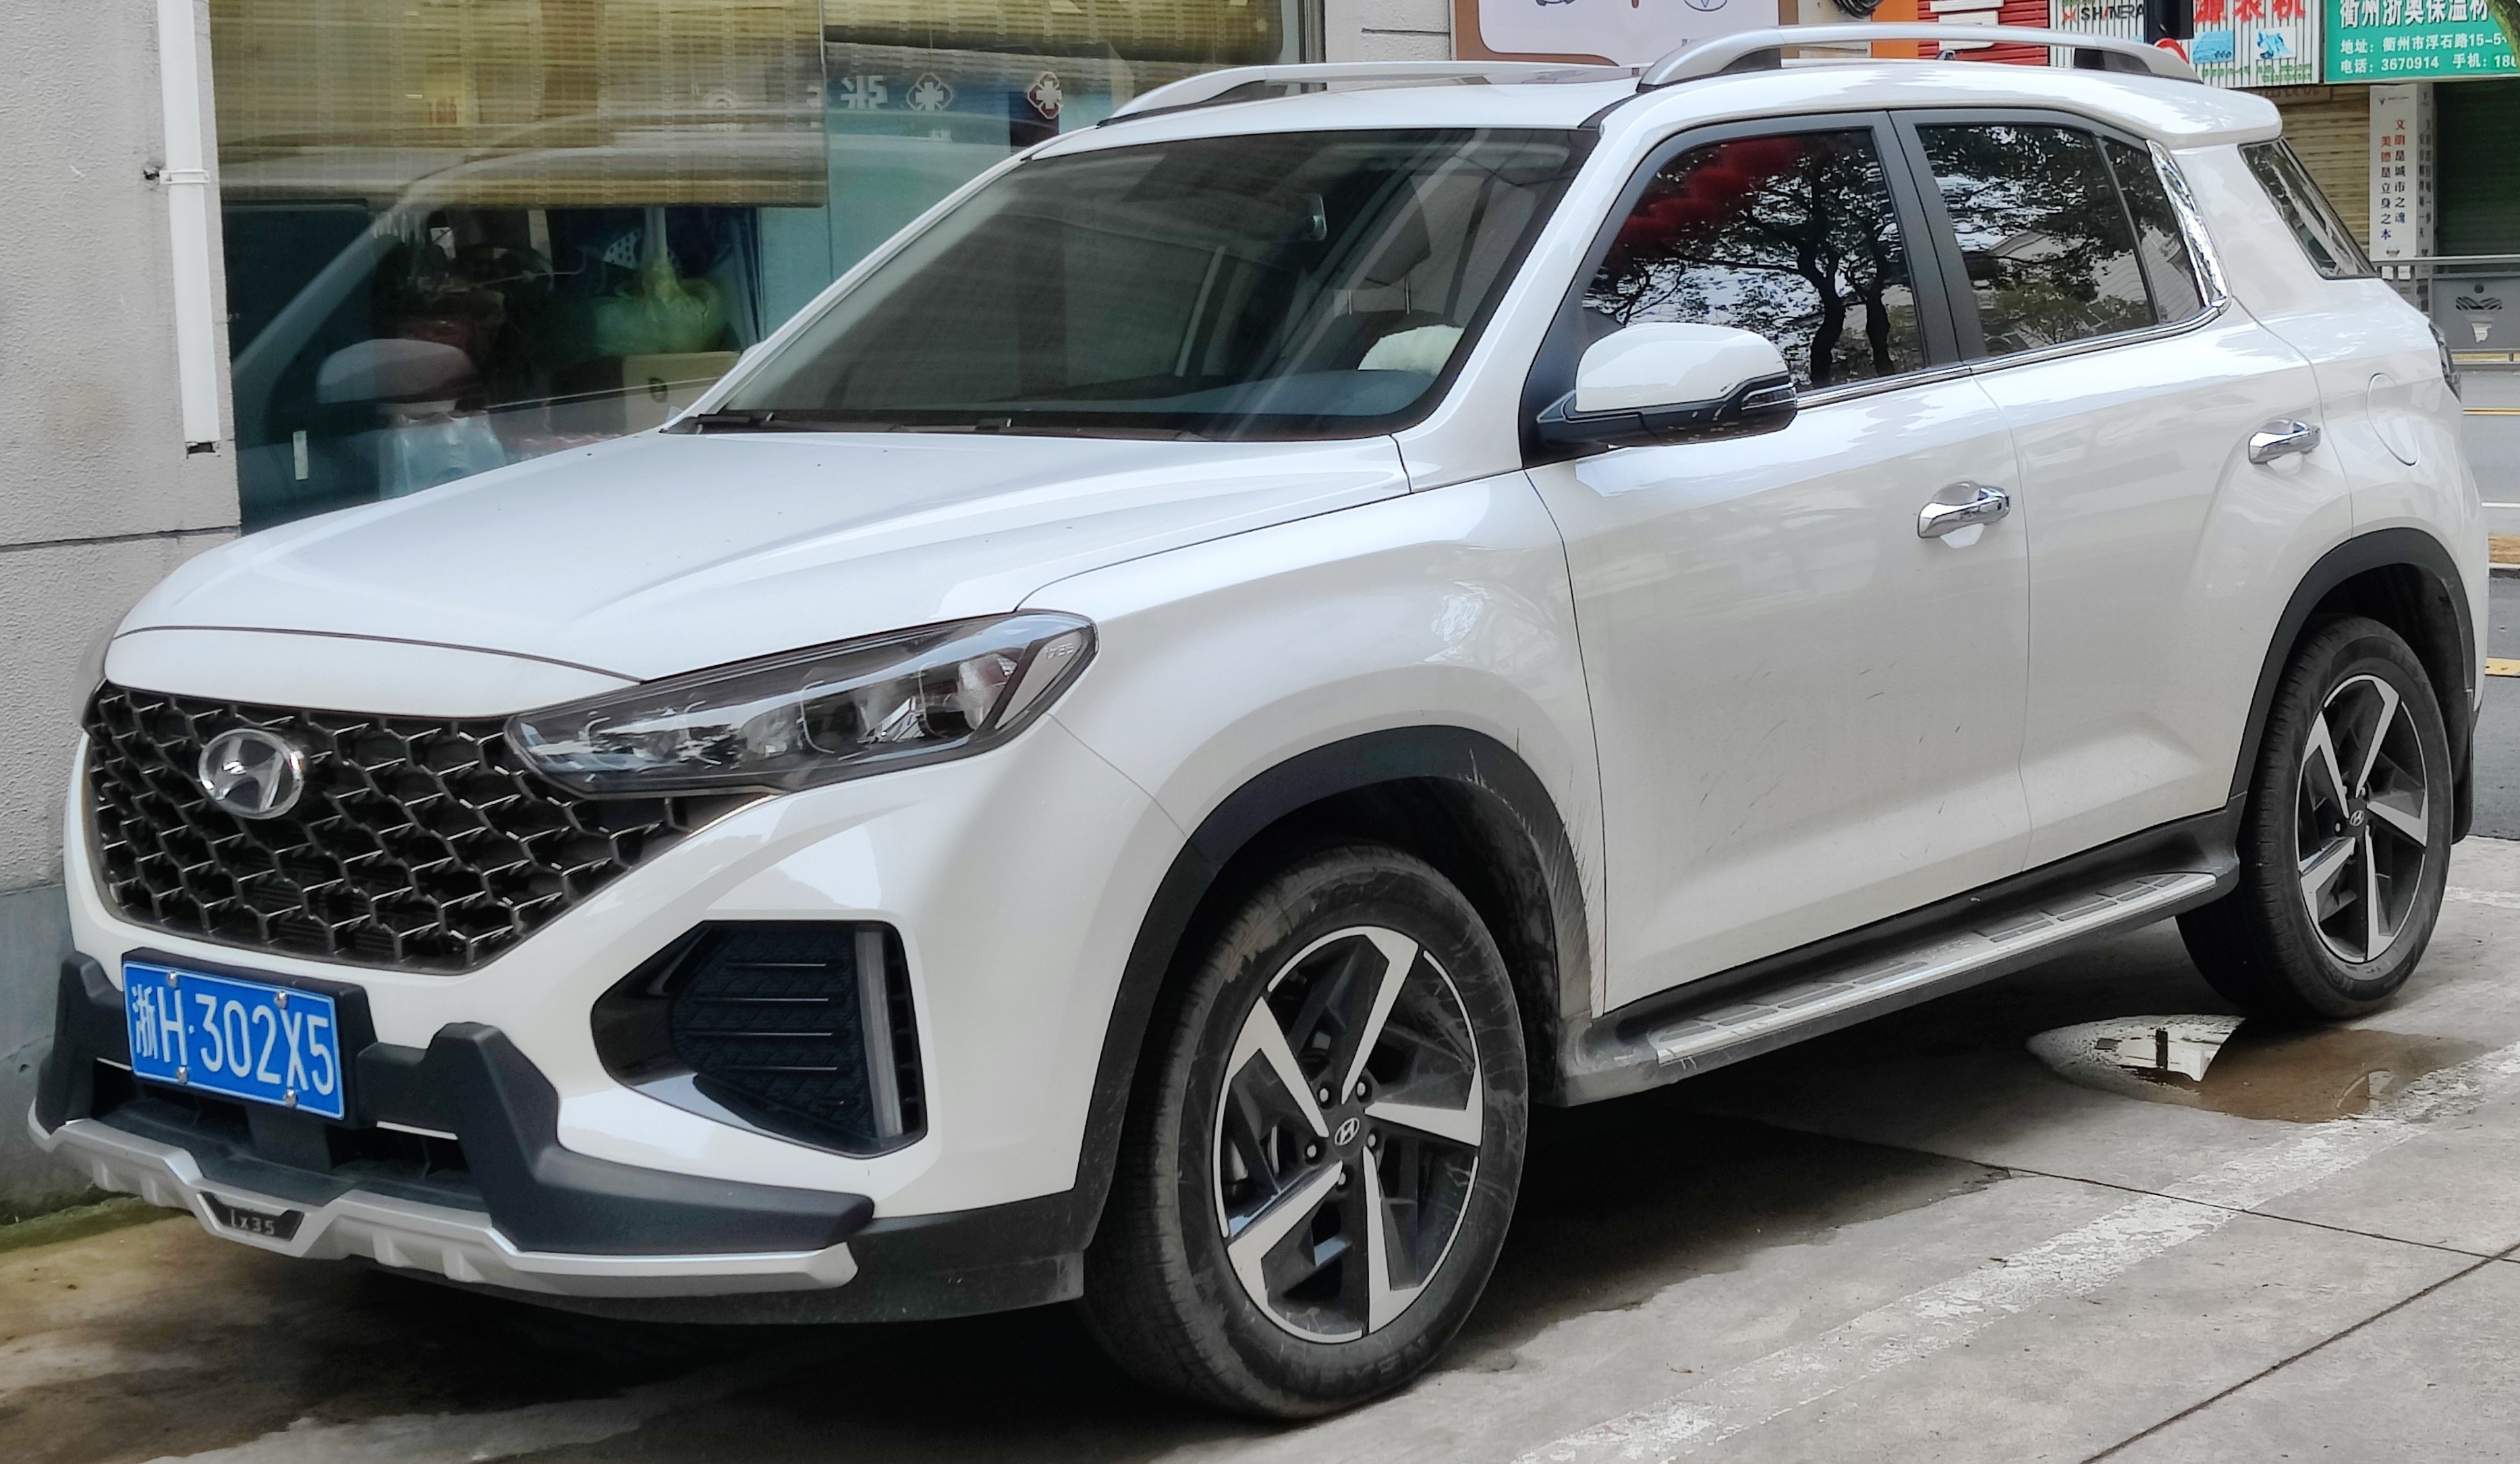 Which Is The Best Selling SUV Of Hyundai?